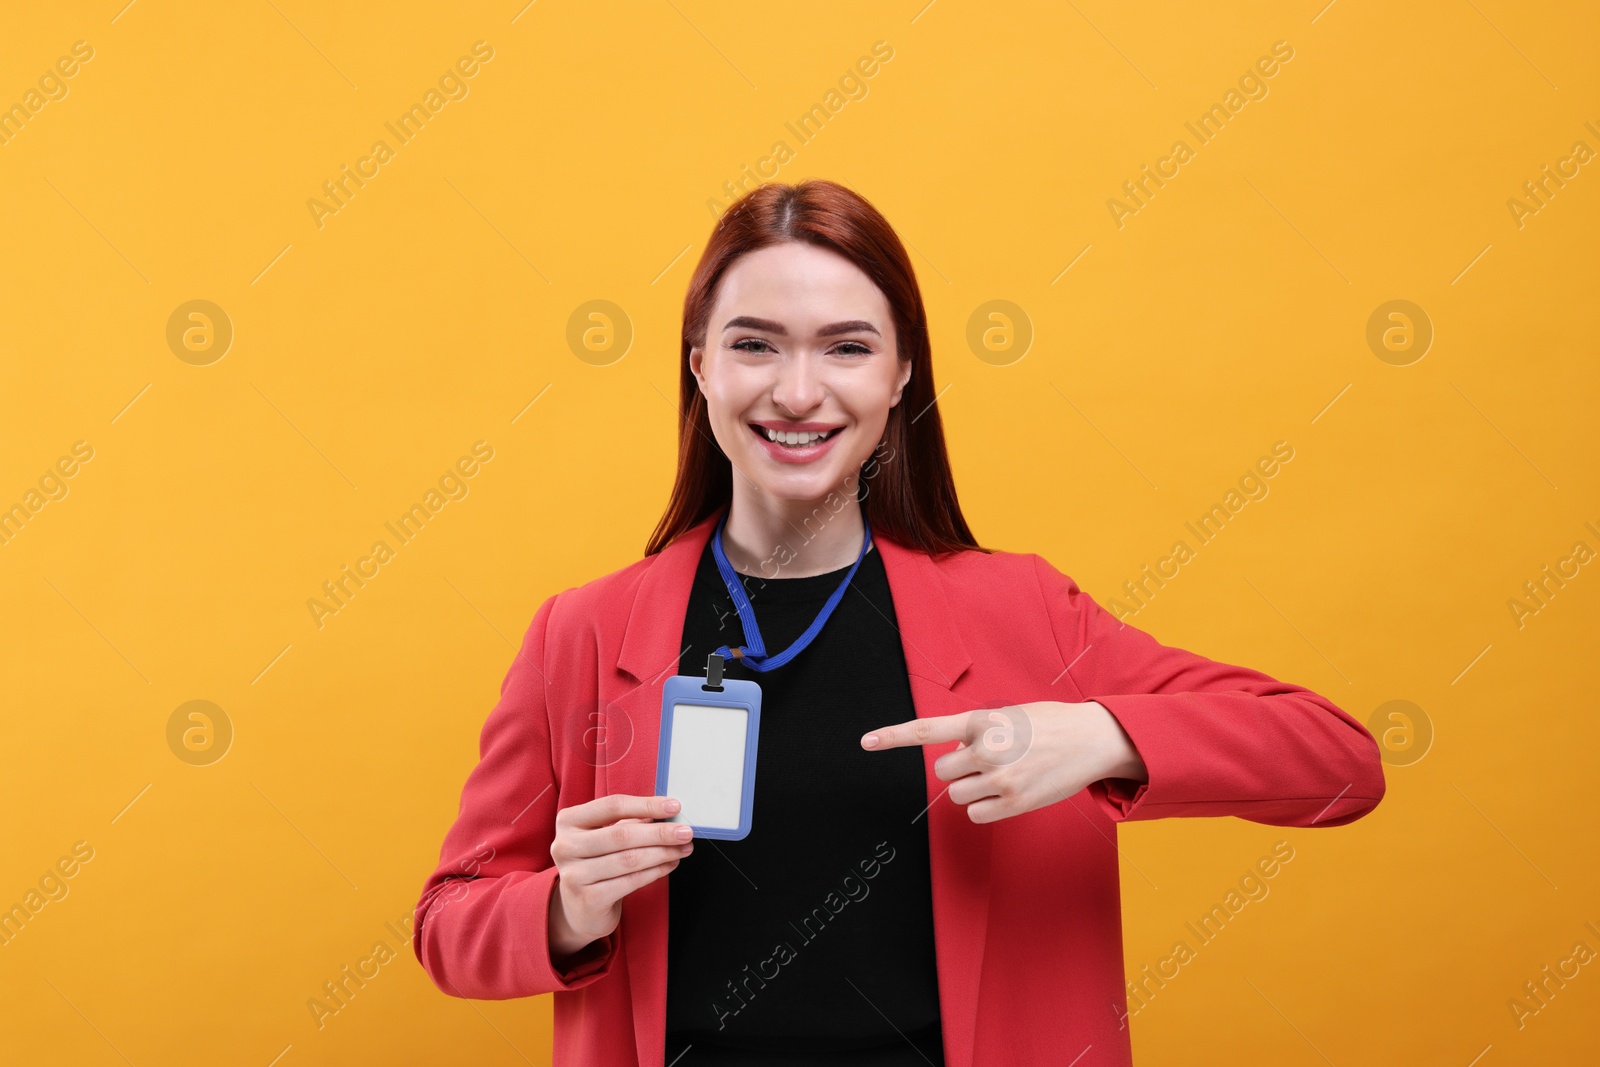 Photo of Smiling woman pointing at vip pass badge on orange background